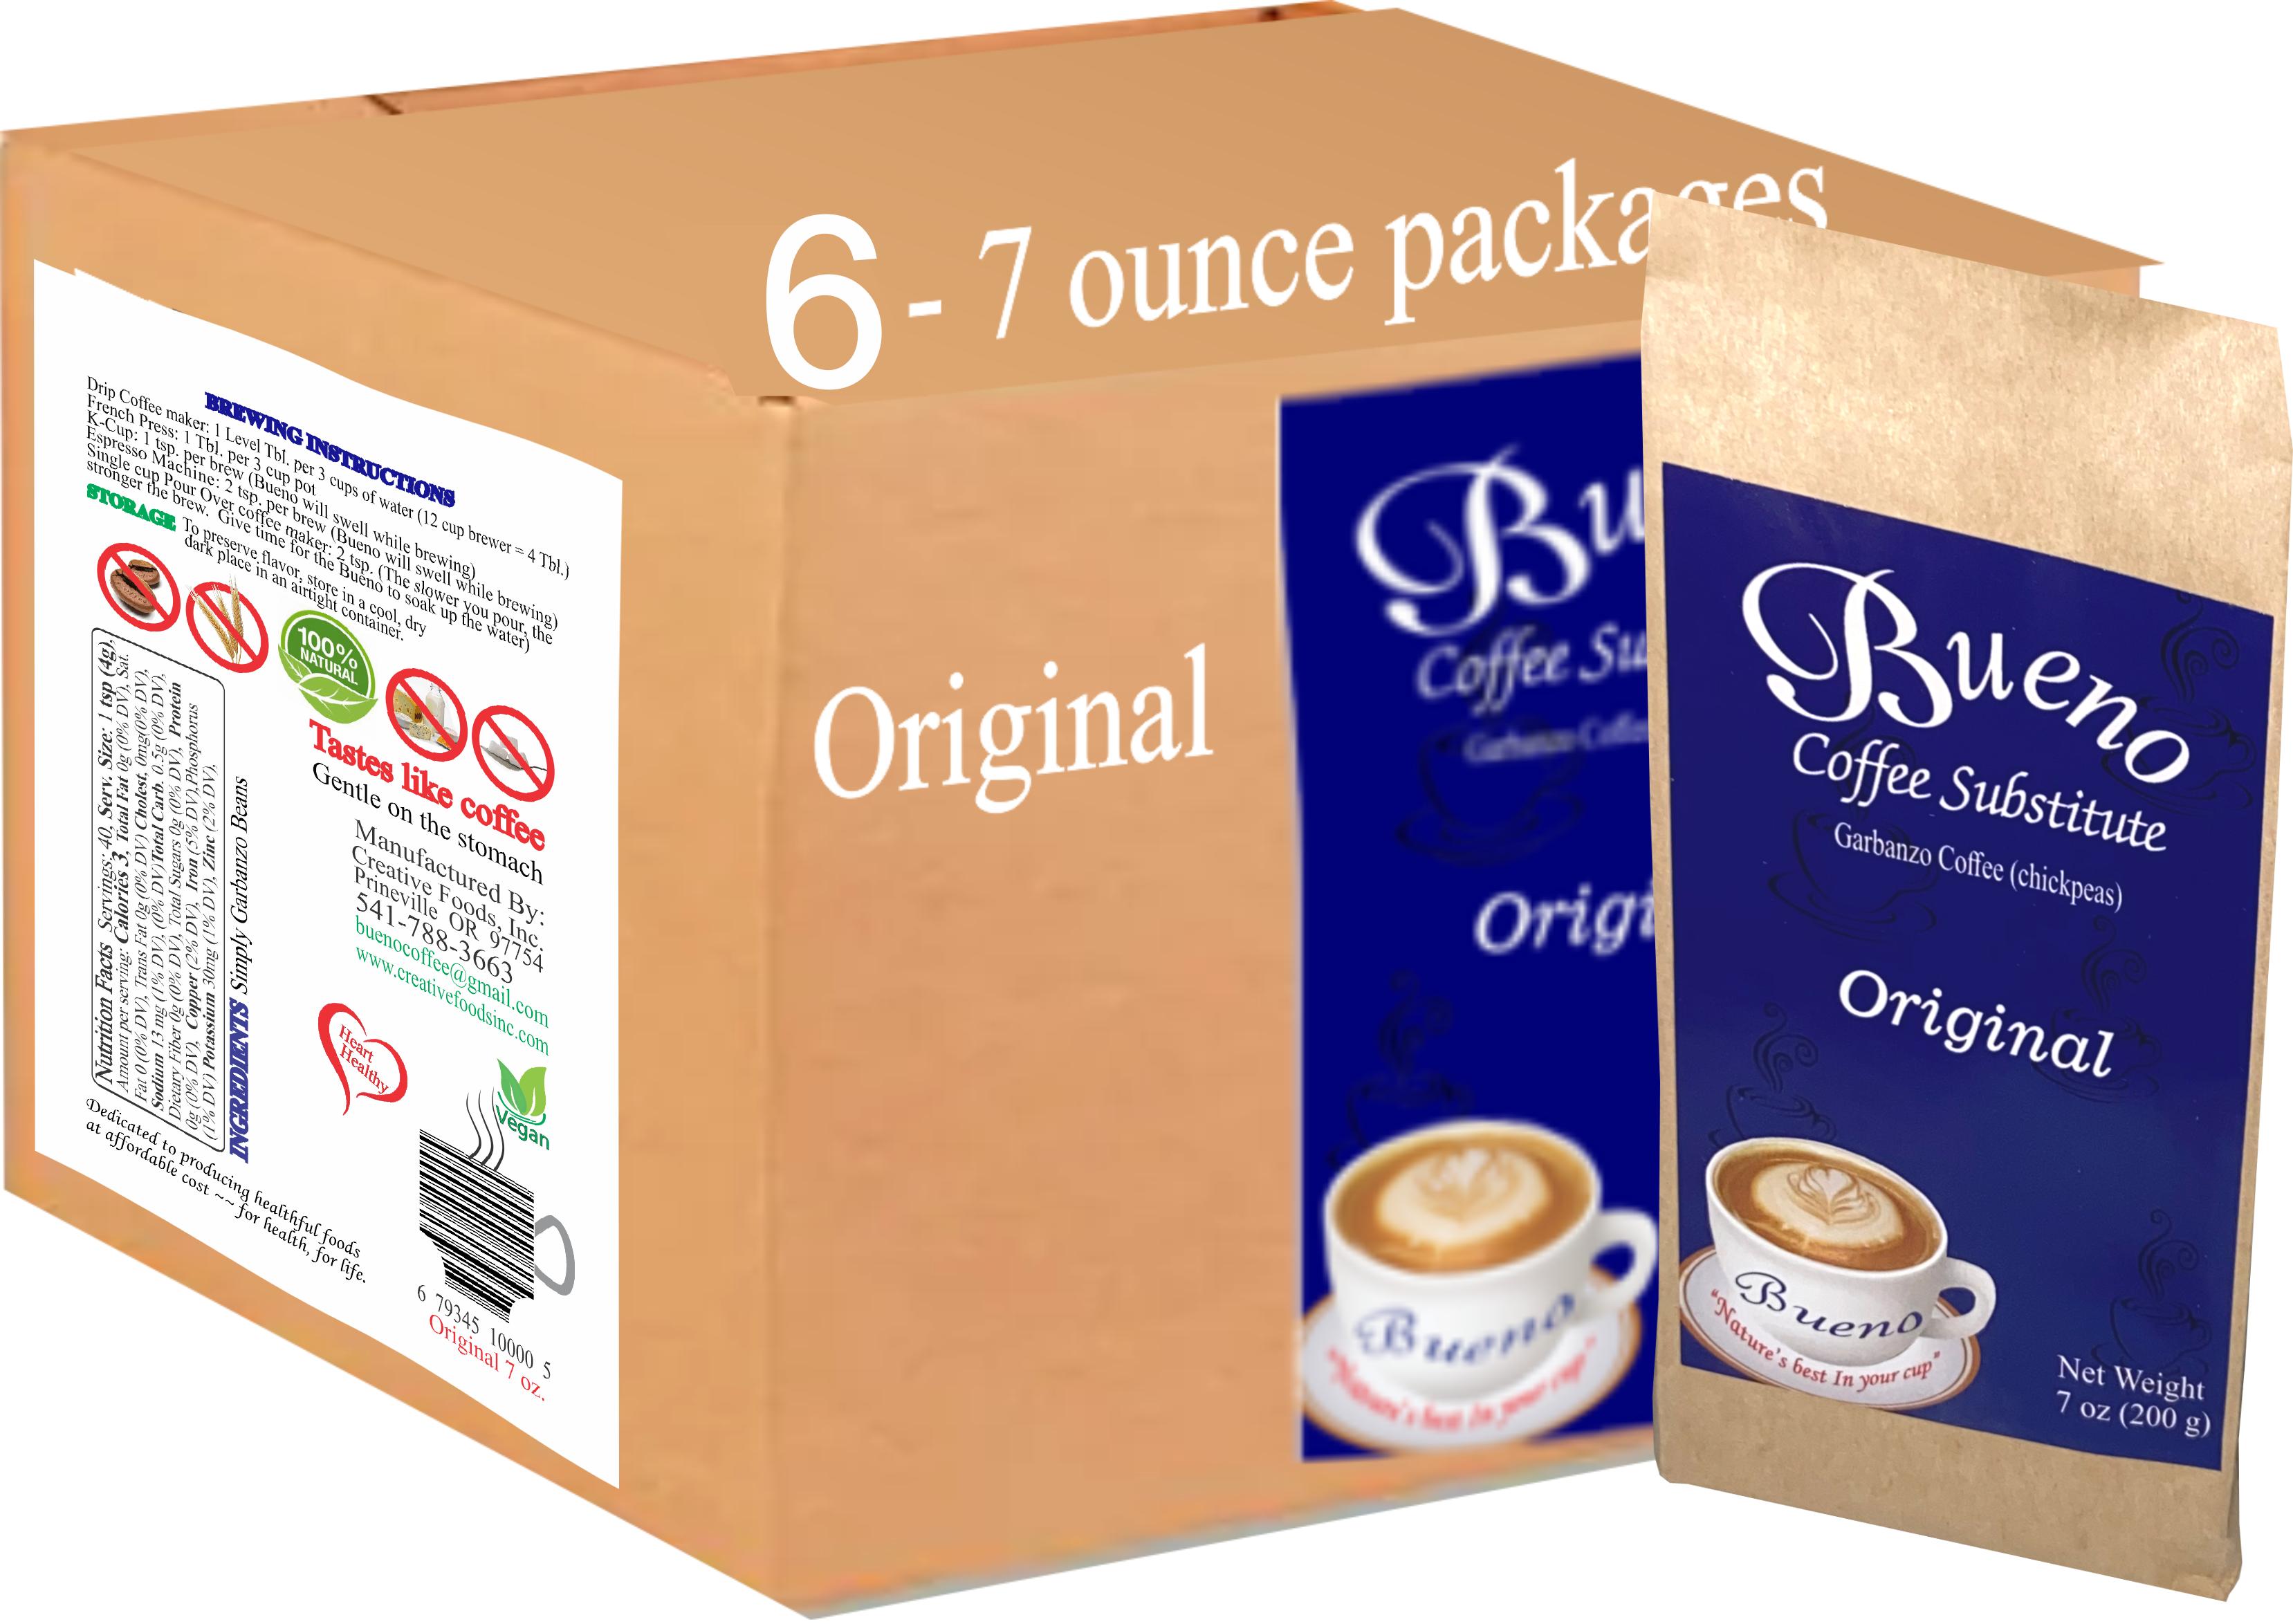 Original 6-7 ounce packages